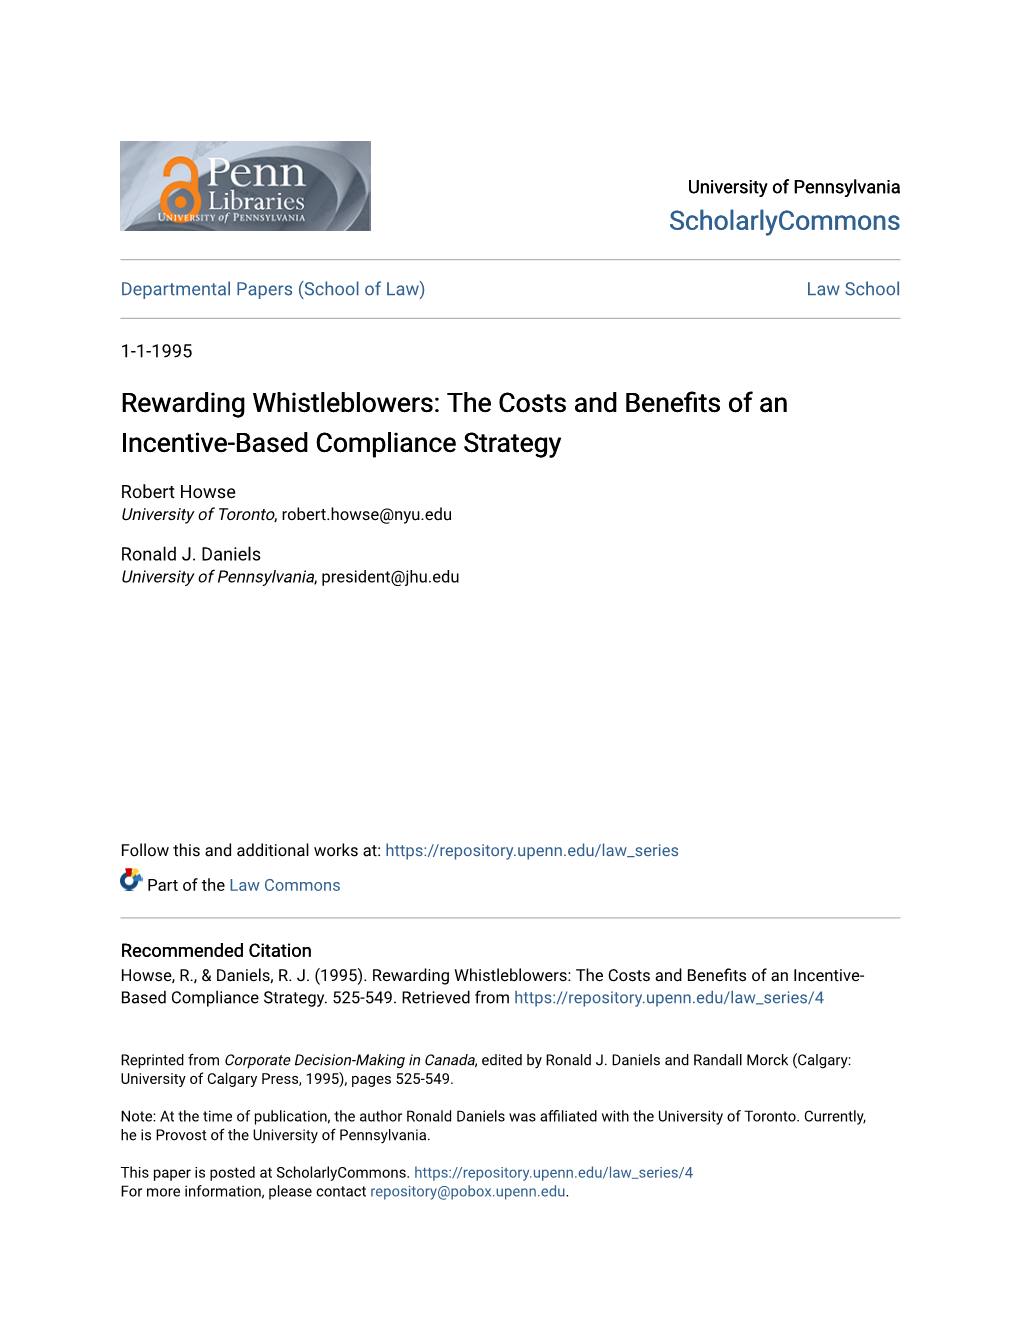 Rewarding Whistleblowers: the Costs and Benefits of an Incentive-Based Compliance Strategy